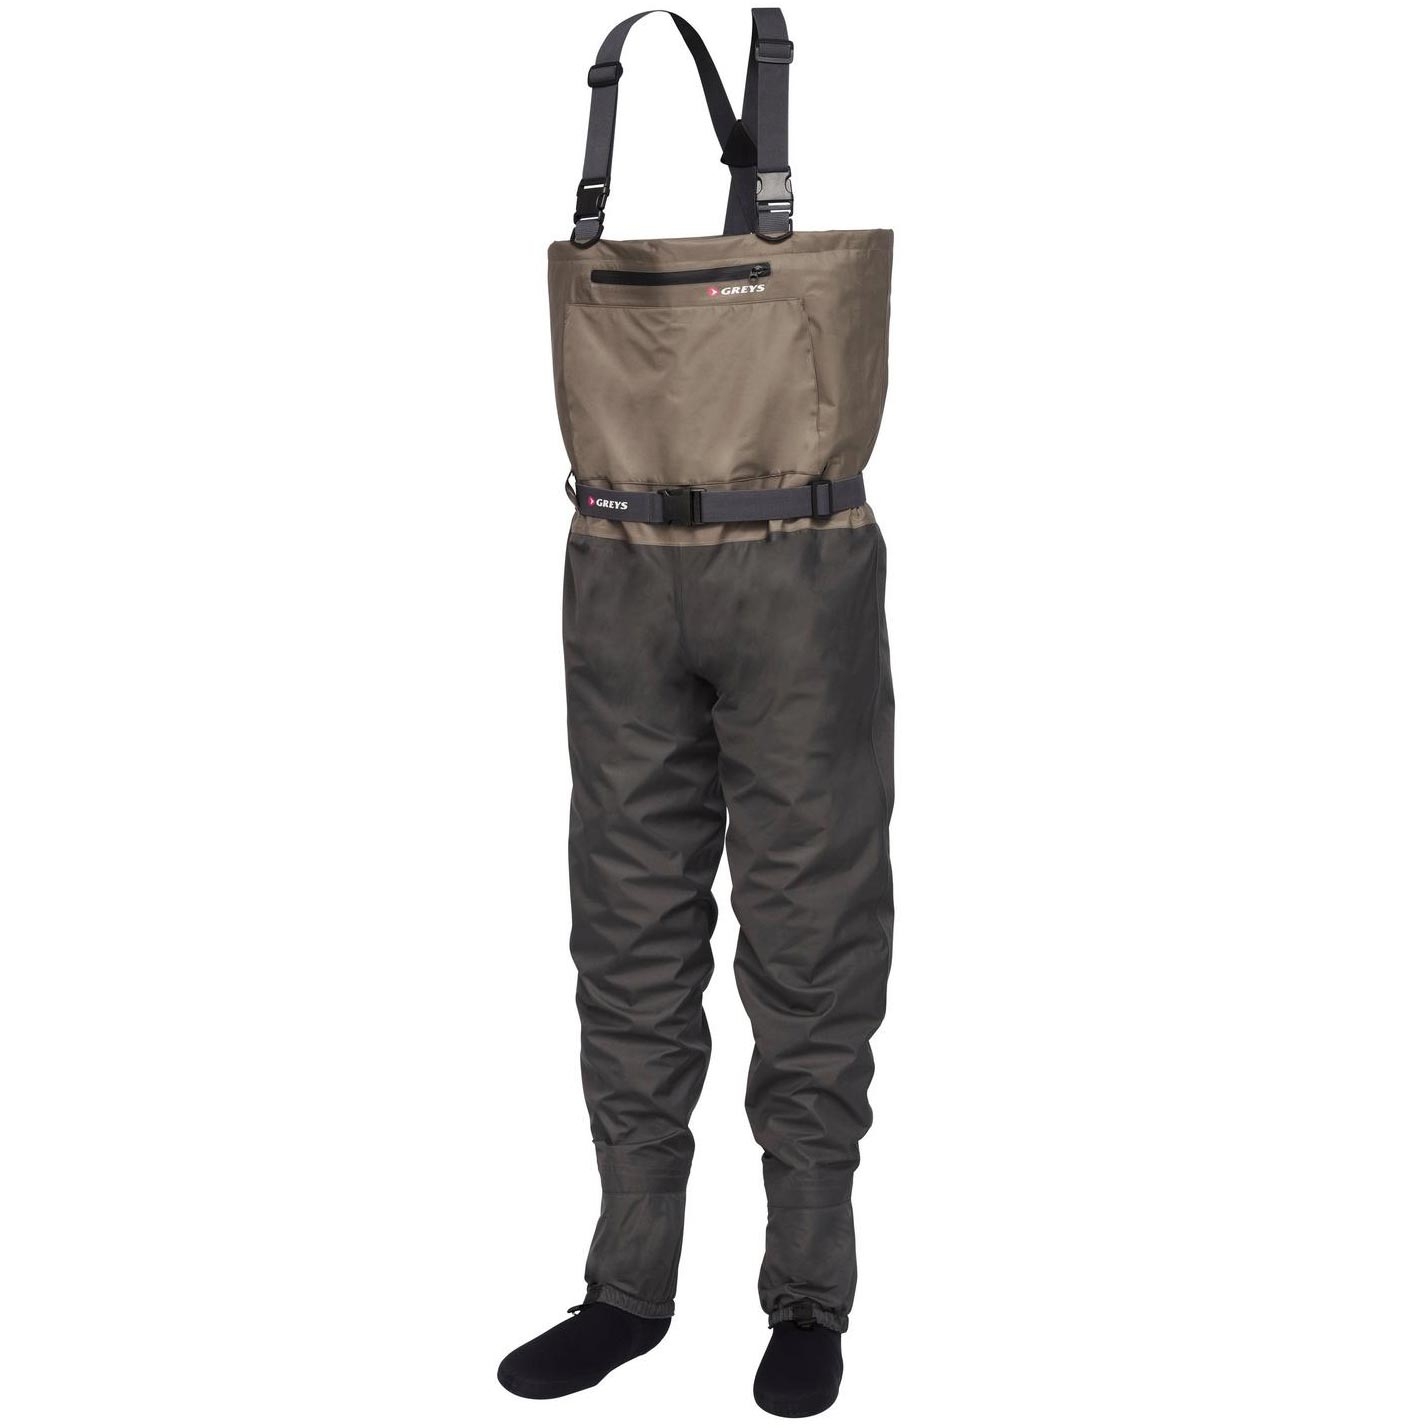 Fishing Waders - Chest or Waist